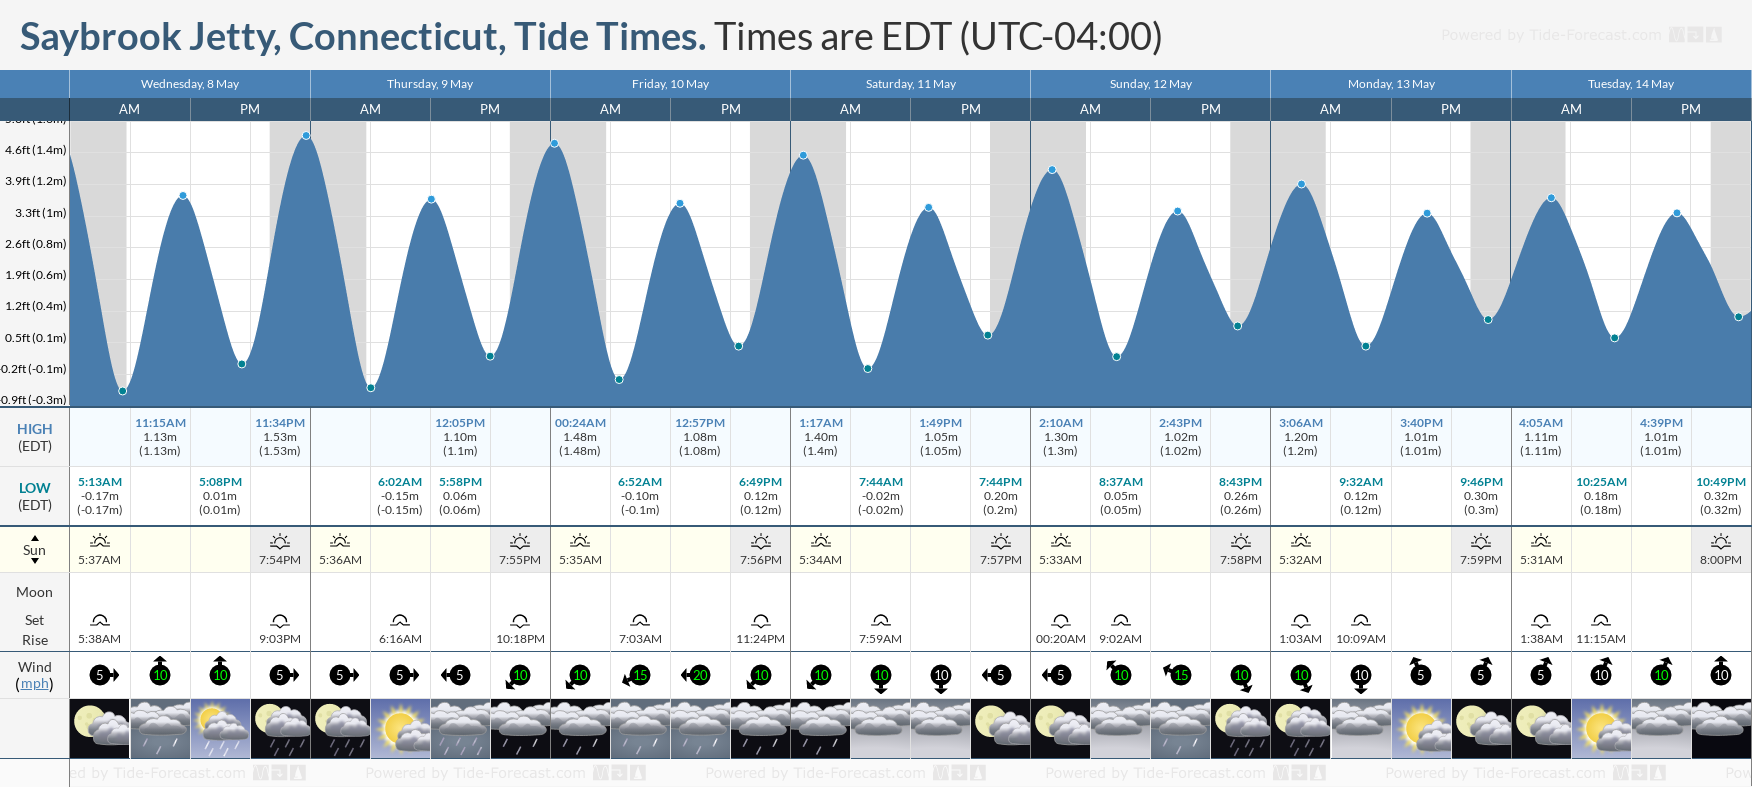 Saybrook Jetty, Connecticut Tide Chart including high and low tide tide times for the next 7 days